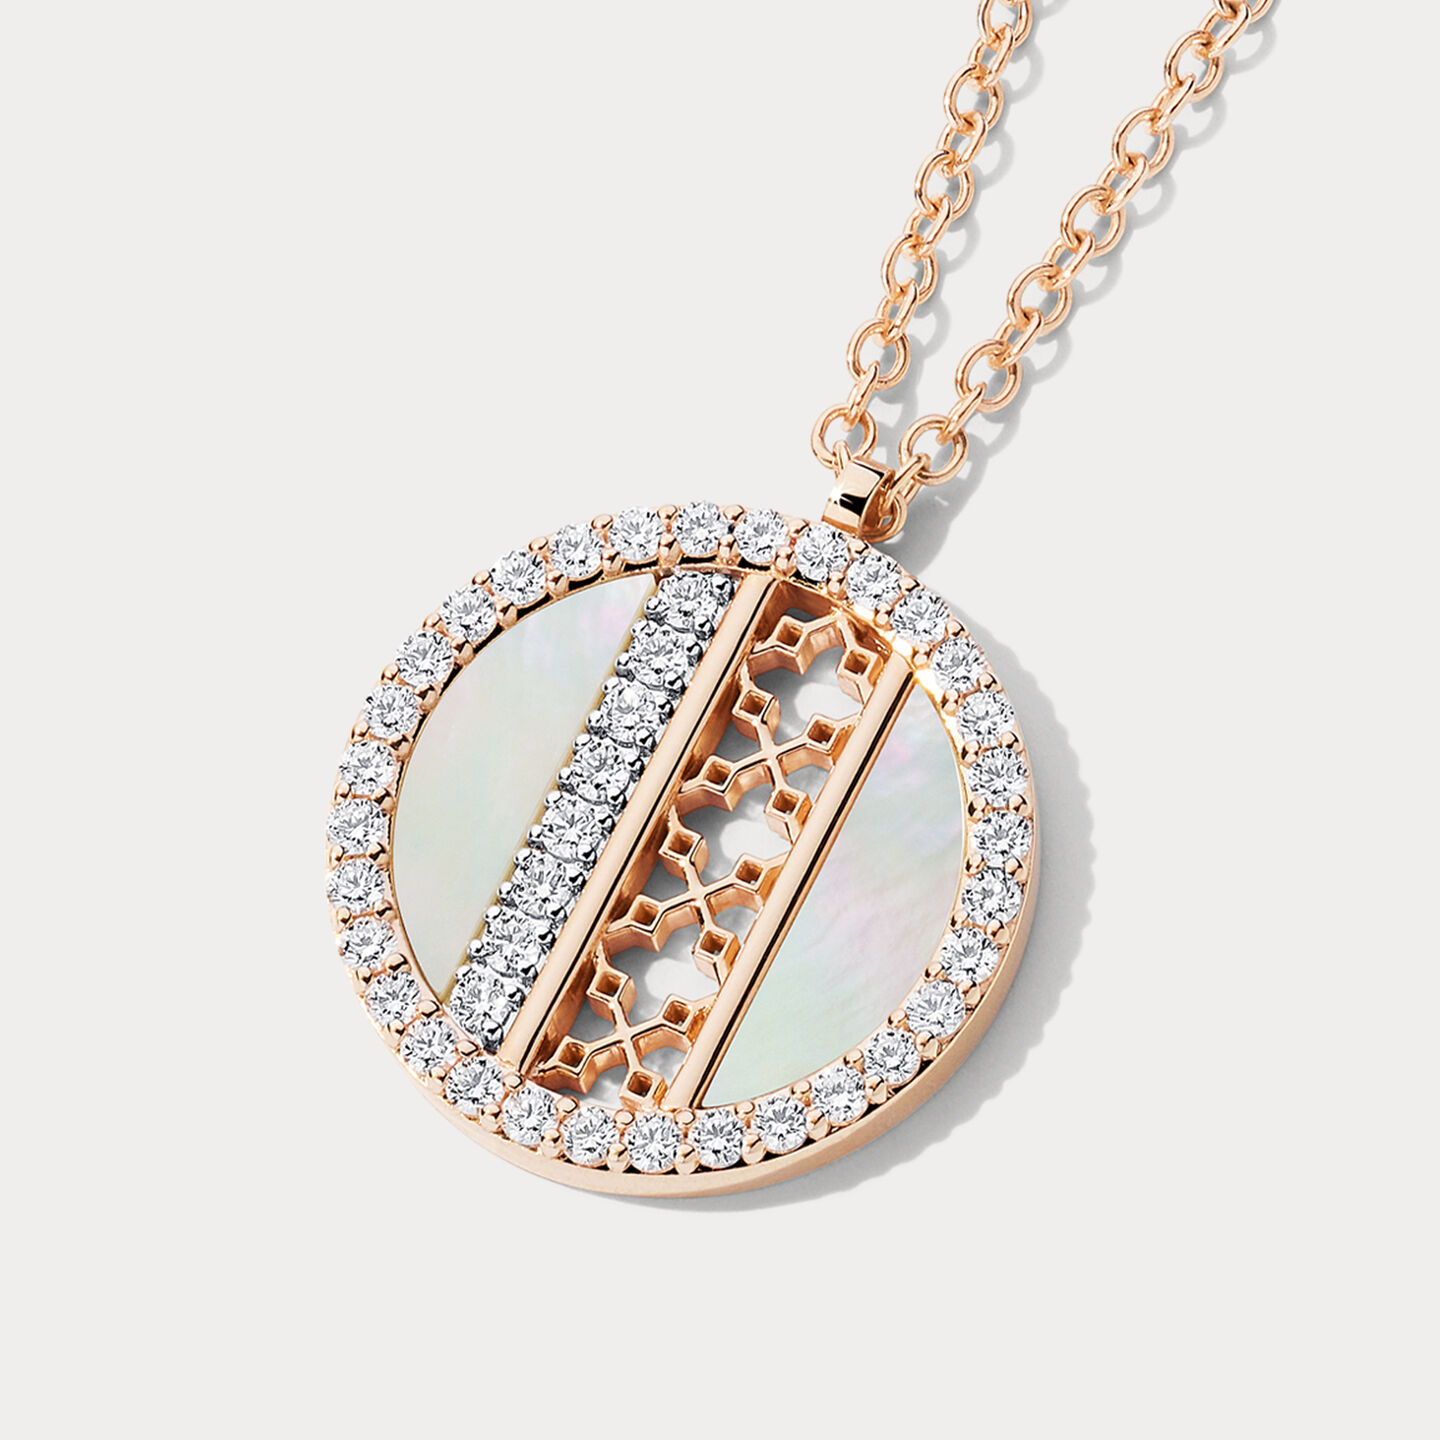 Birks Dare to Dream mother-of-pearl and diamond pendant on a greyish beige background.